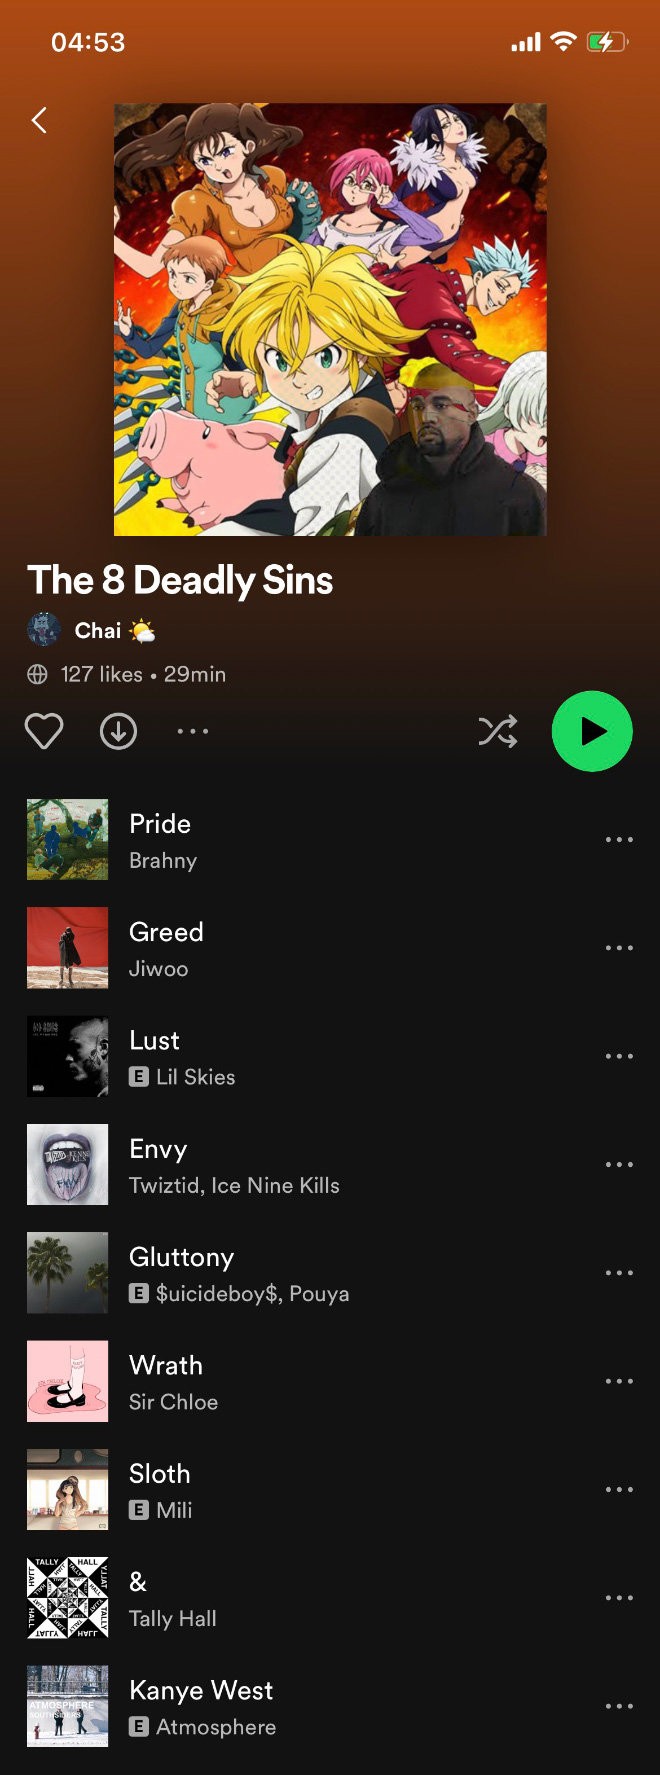 The 8 deadly sins.